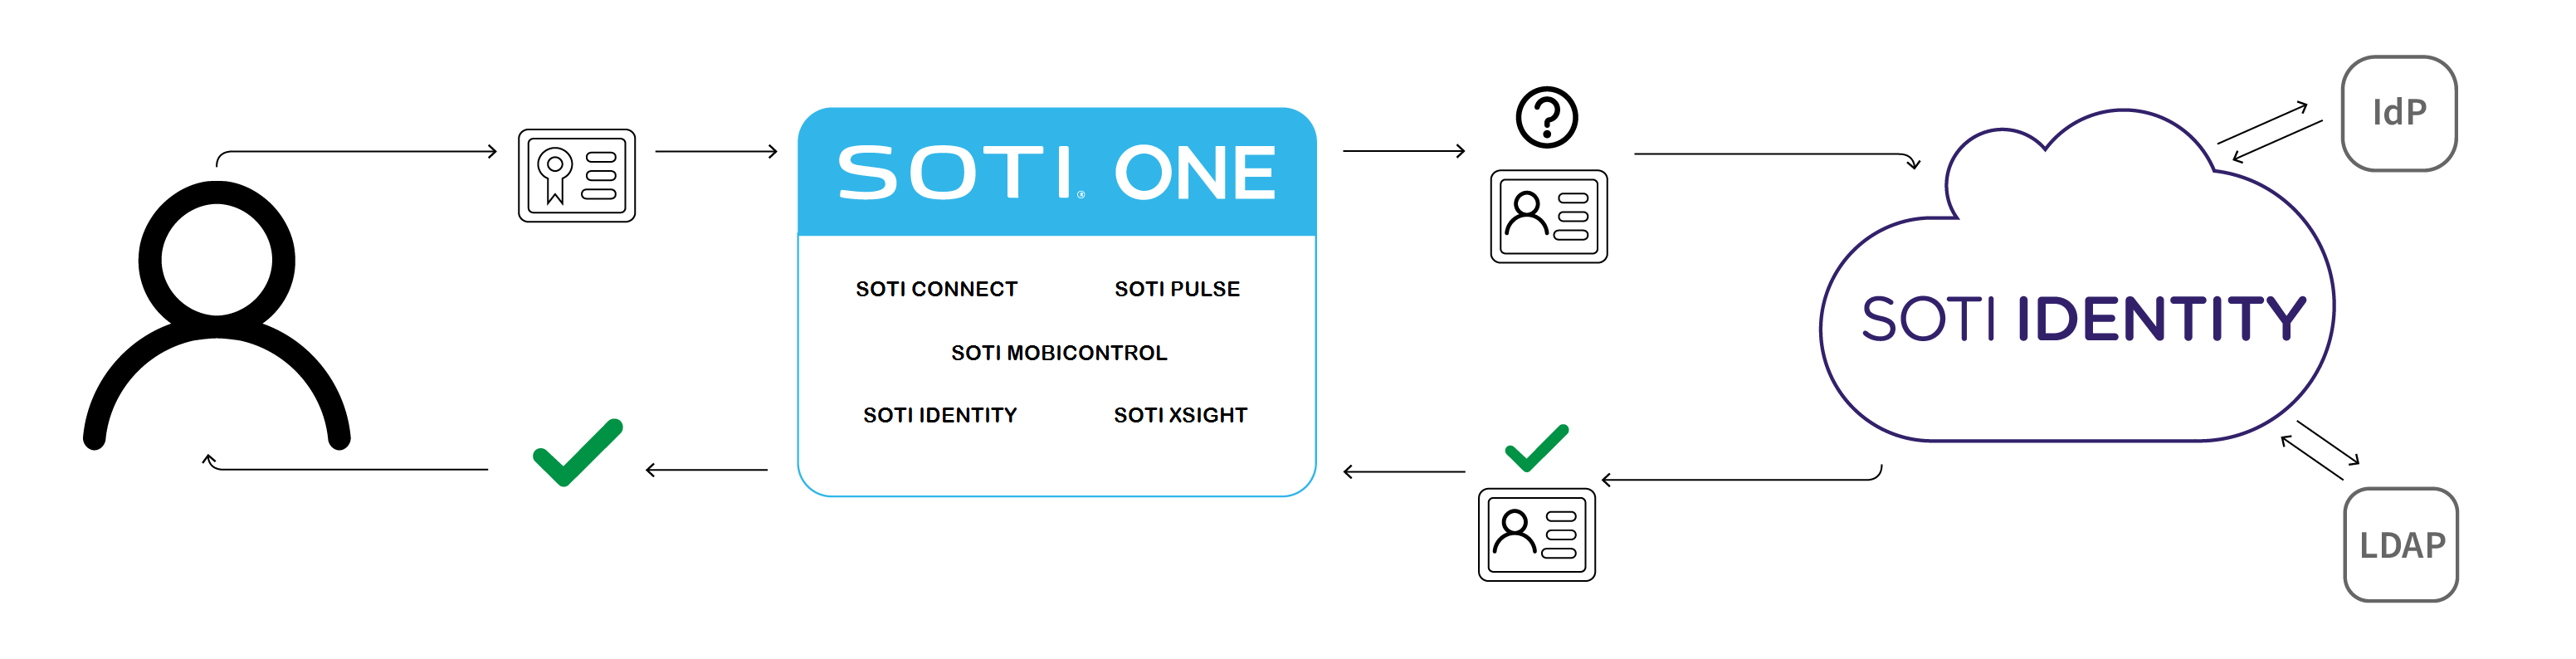 SAML flow in SOTI Identity with added LDAP and IdPs